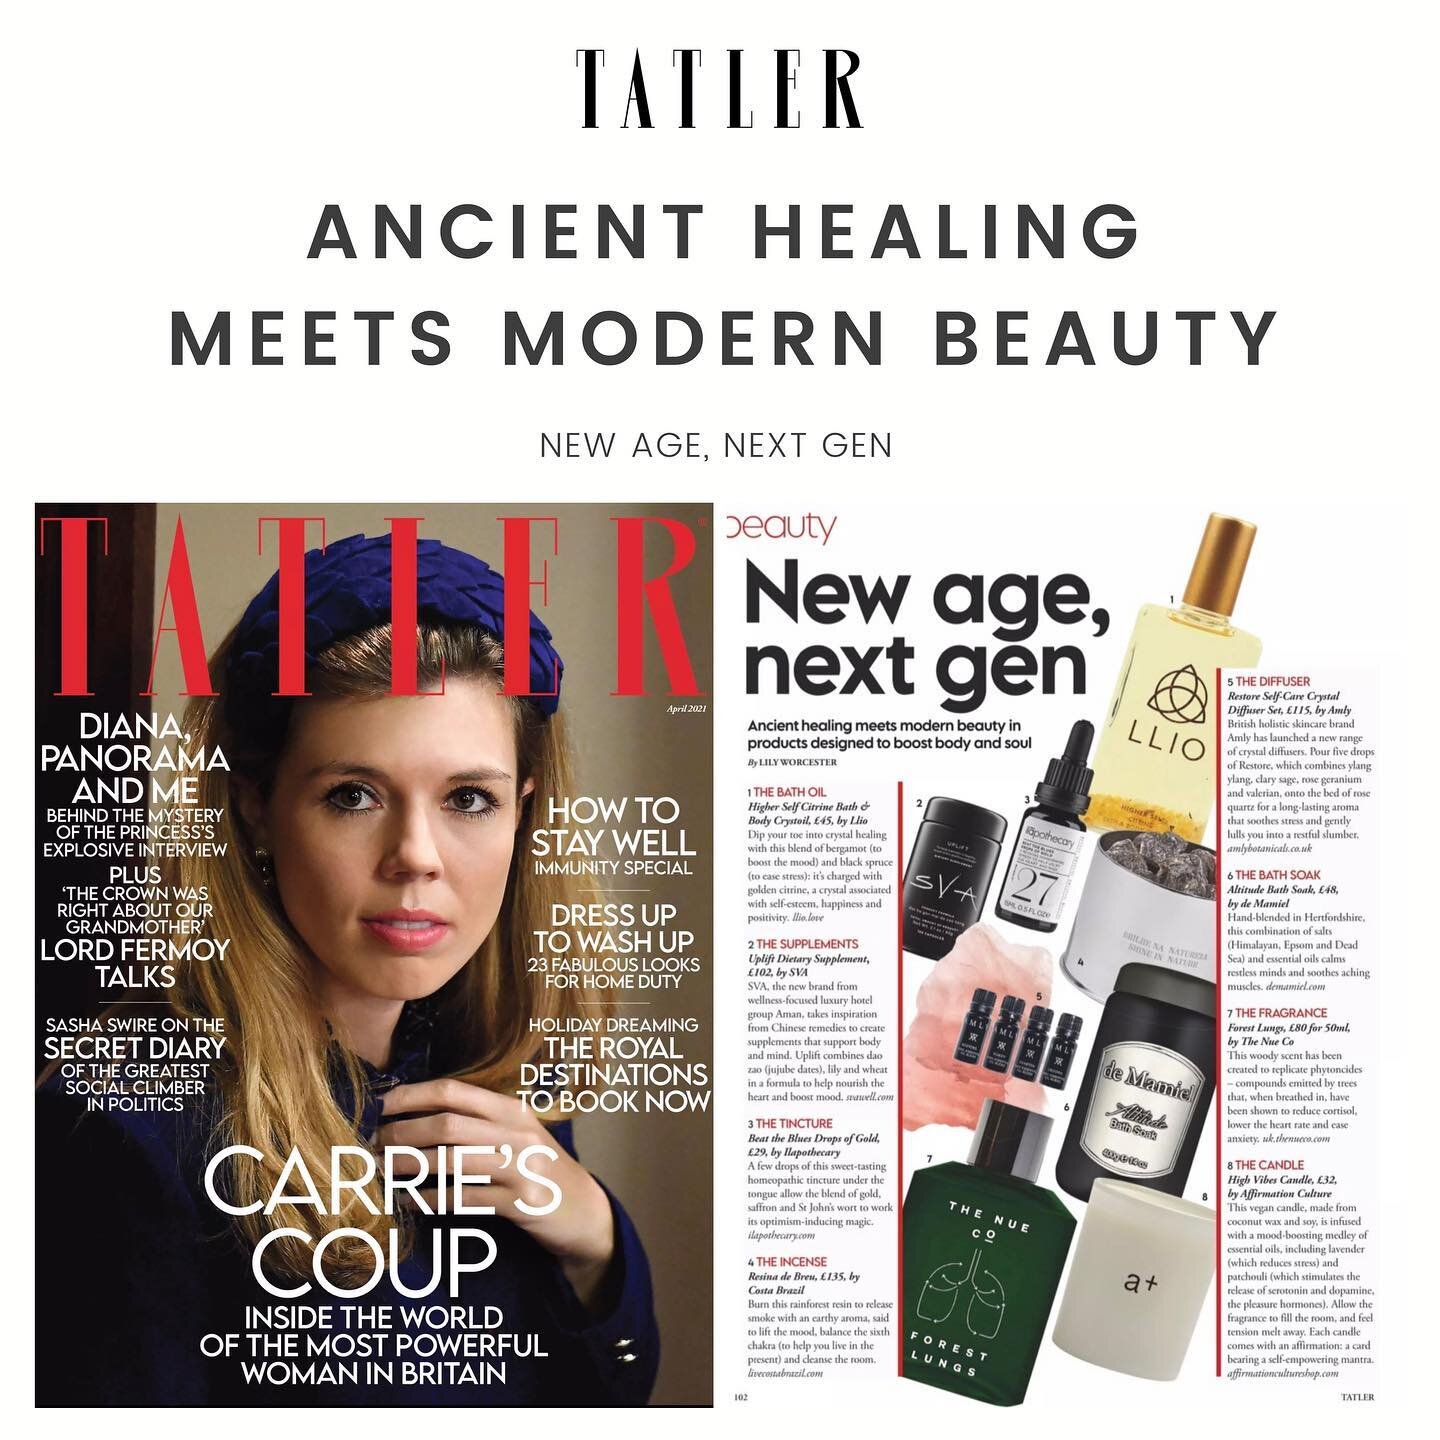 &quot;Ancient healing meets modern beauty&quot; 

We are in @tatlermagazine !!! We are so happy to have been featured in @lilyworcester &quot;New age, next gen&quot; article, showcasing products designed to boost body and soul.

Our crystal infused p